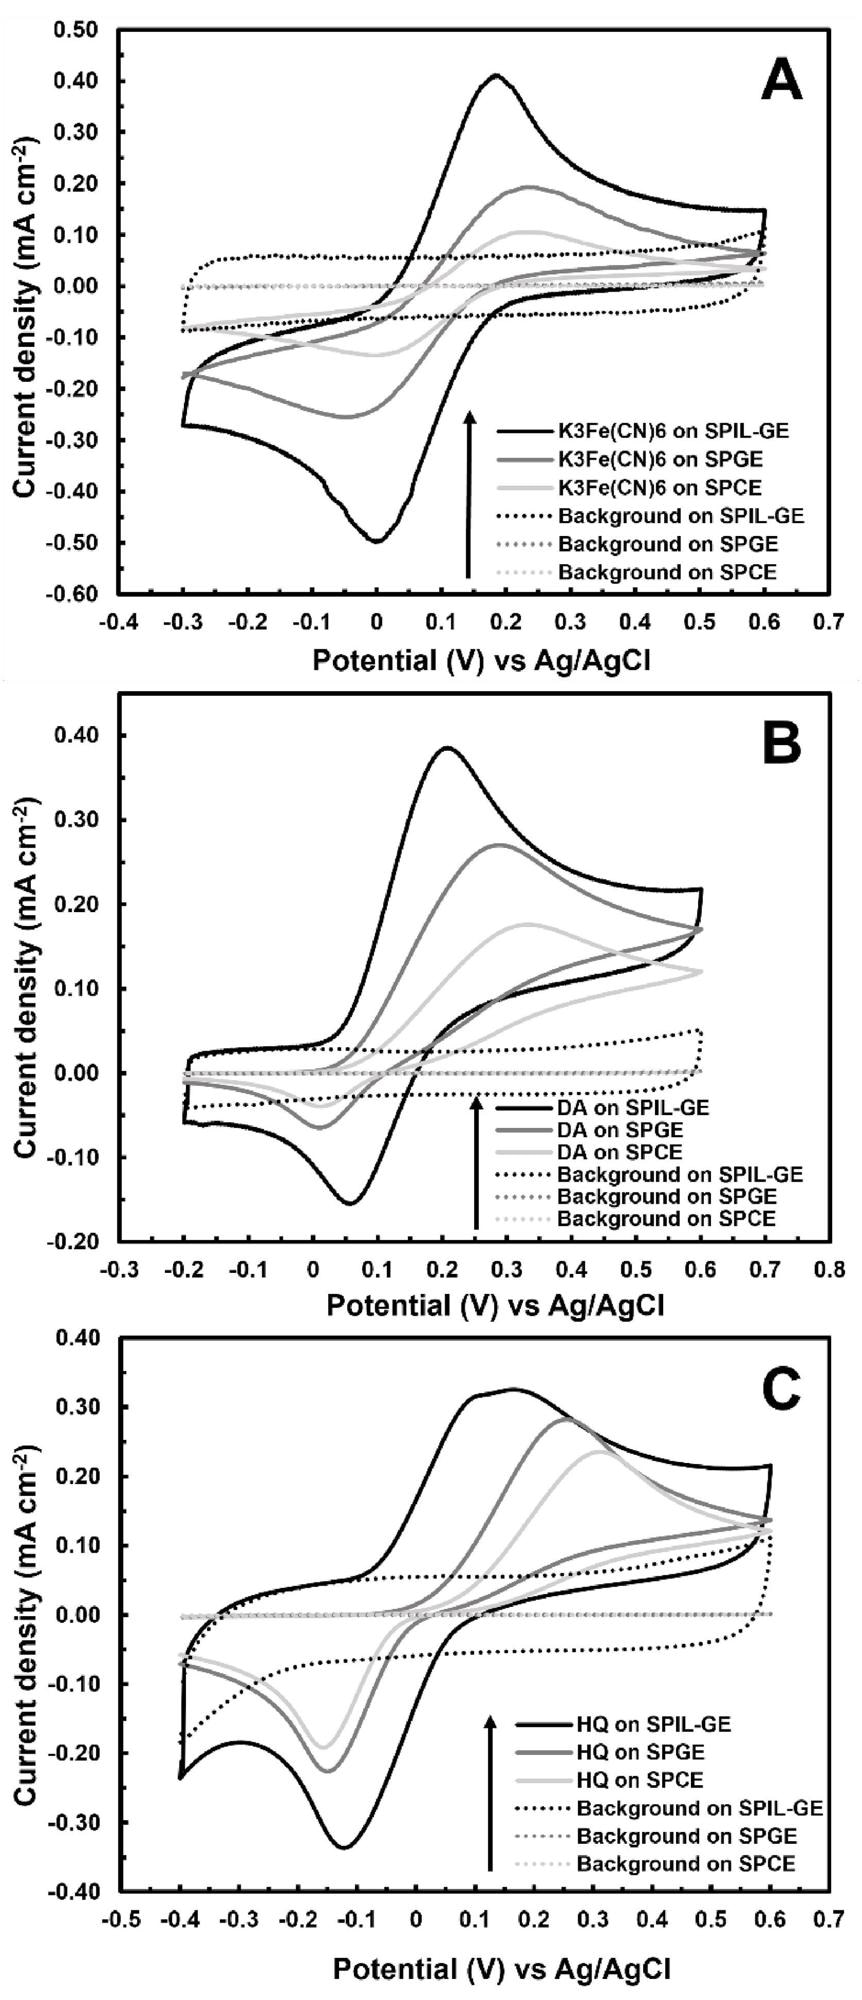 Cyclic voltammograms of SPIL-GE, SPGE, and SPCE towards (a) 2.5 mM K3Fe(CN)6, (b) 1 mM dopamine (DA) and (c) 1 mM hydroquinone (HQ) at 50 mVs-1.